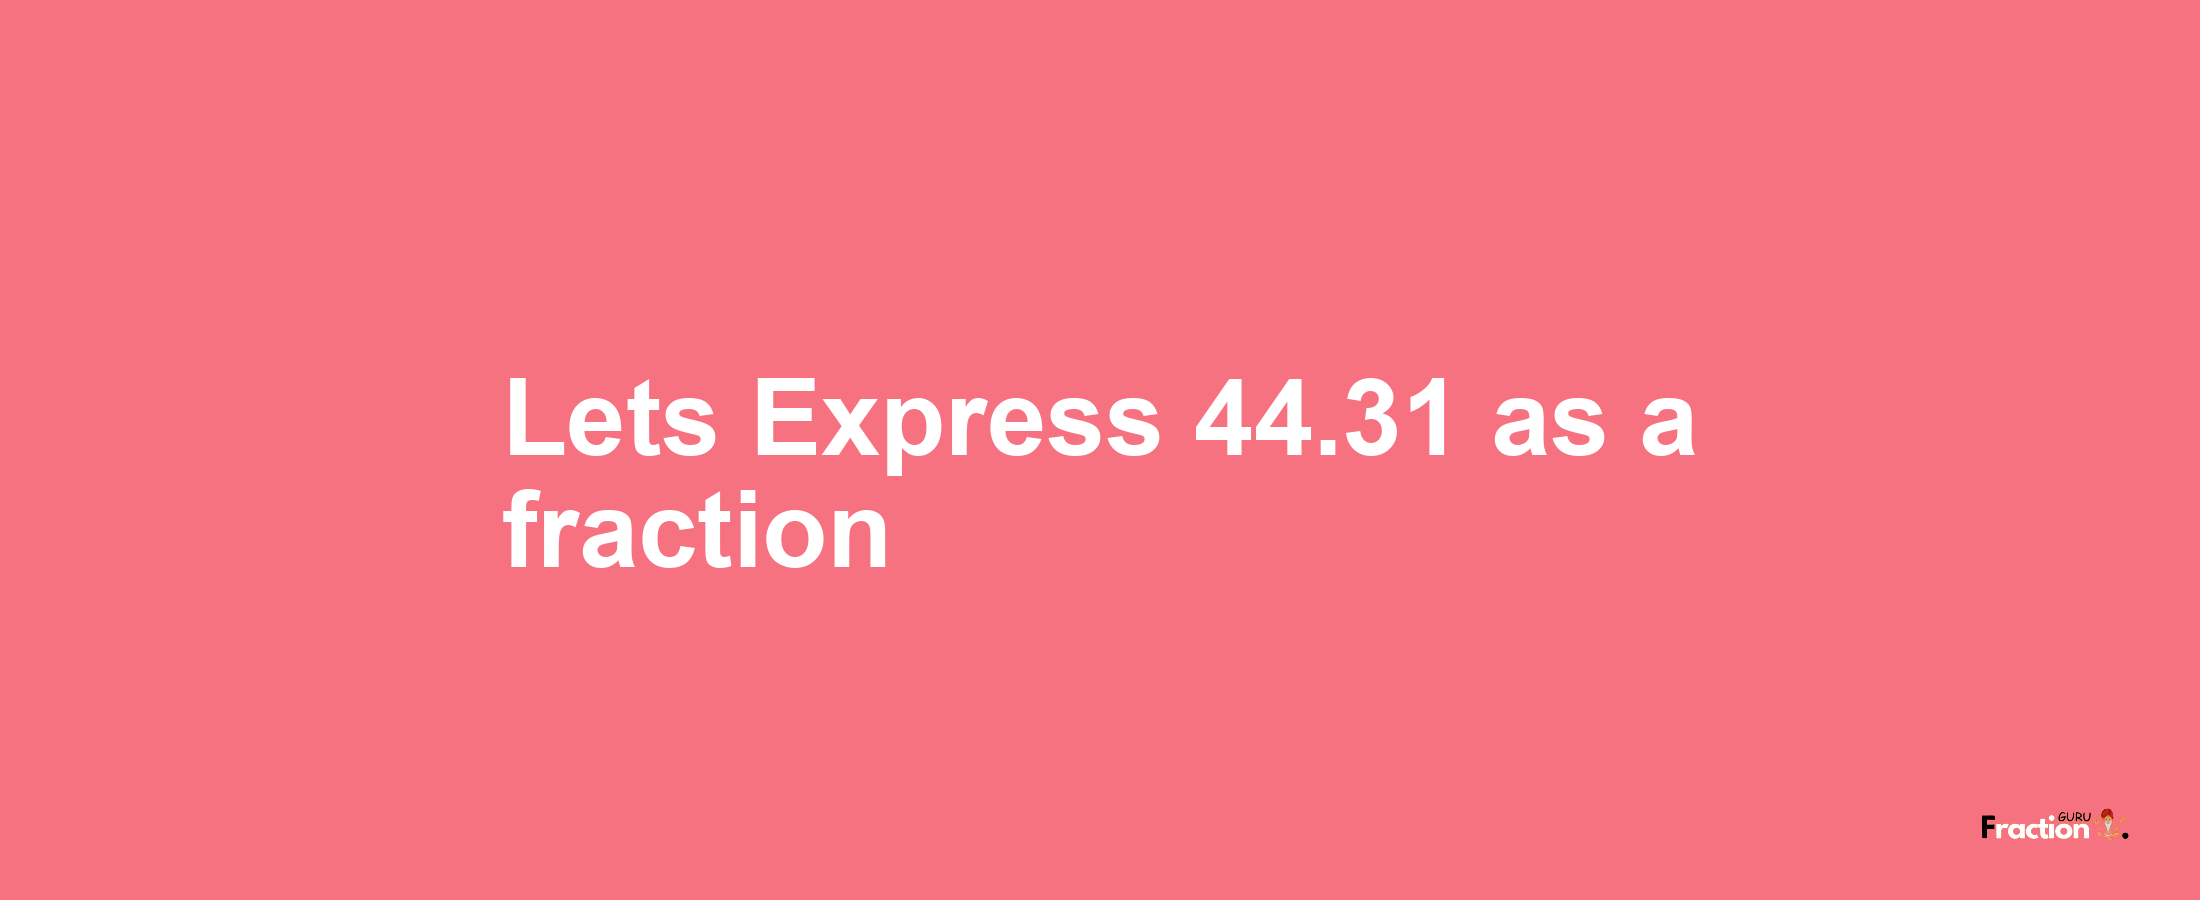 Lets Express 44.31 as afraction